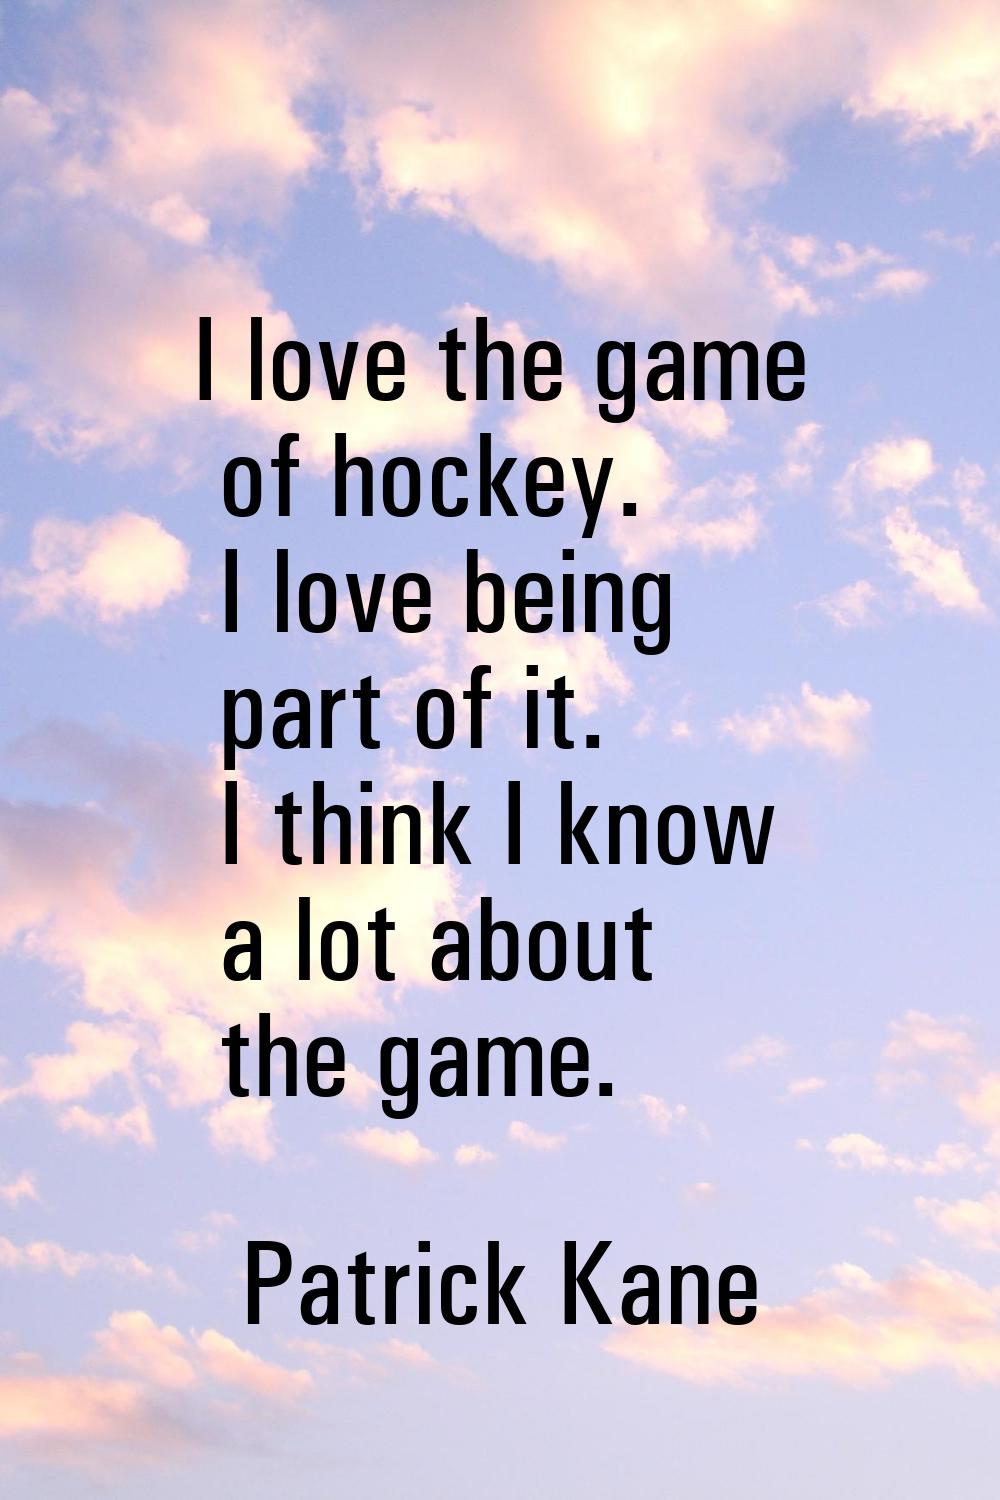 I love the game of hockey. I love being part of it. I think I know a lot about the game.